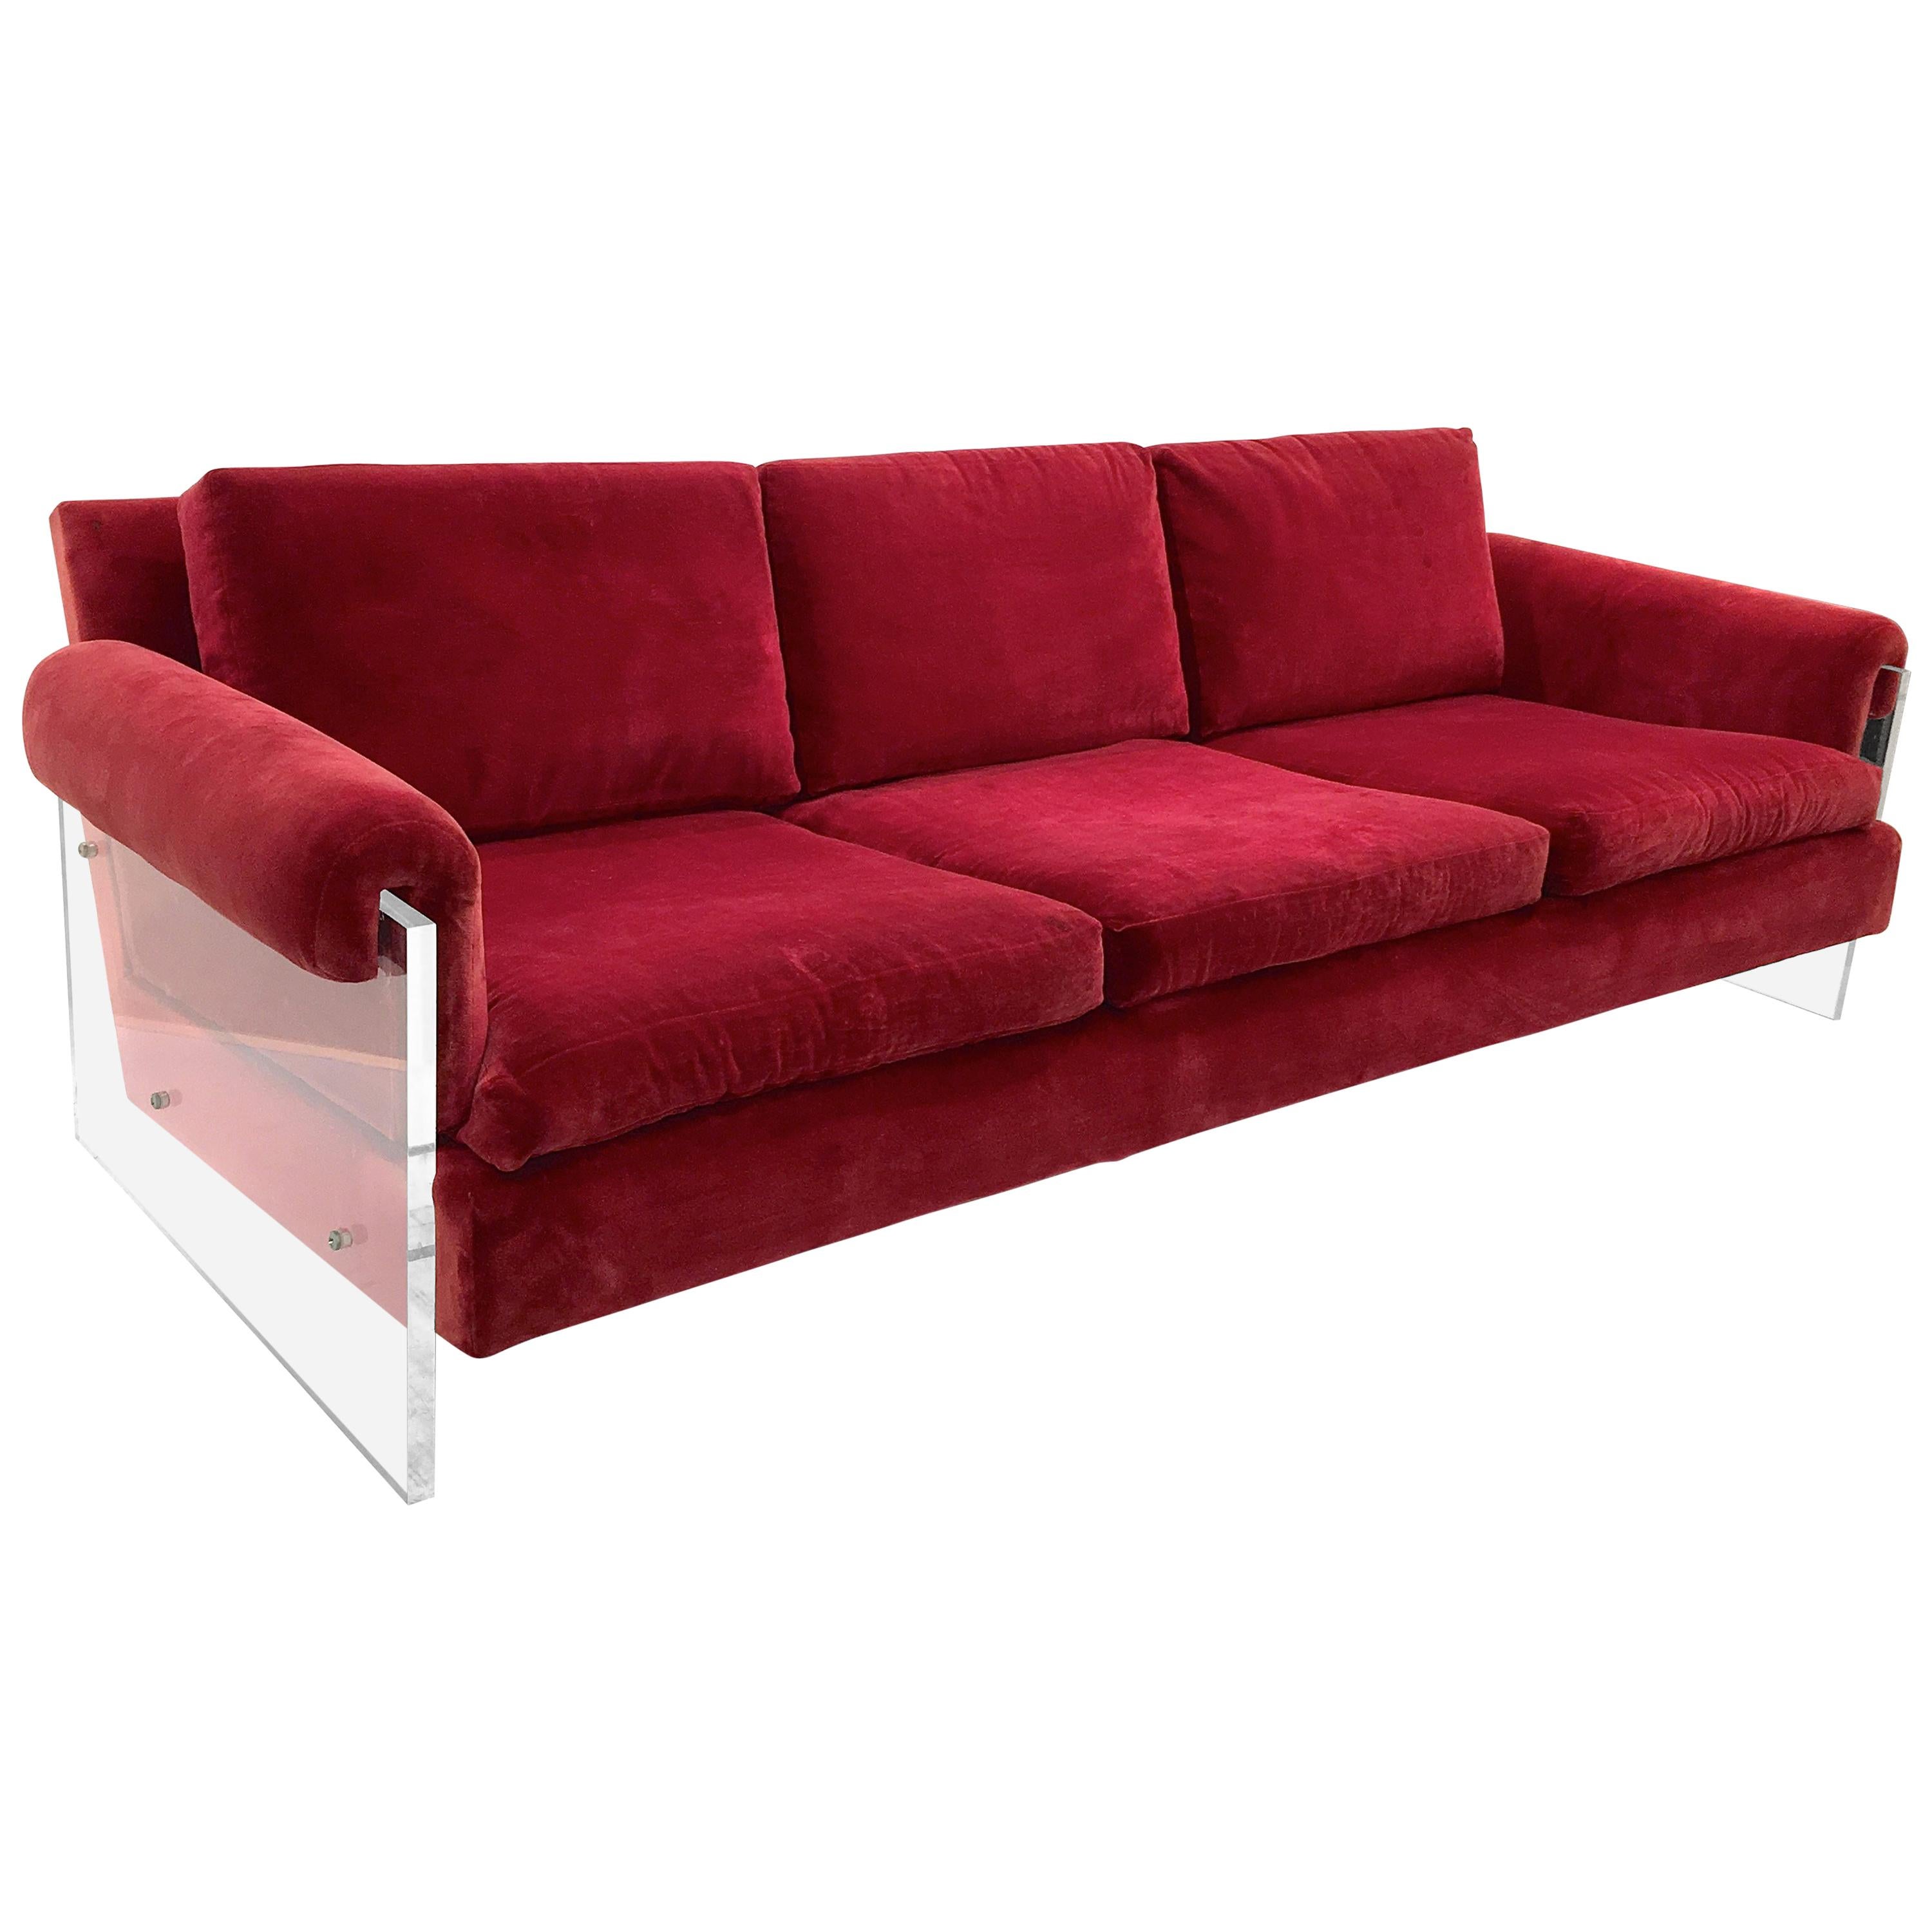 Lucite Sided Sofa by Milo Baughman for Thayer Coggin